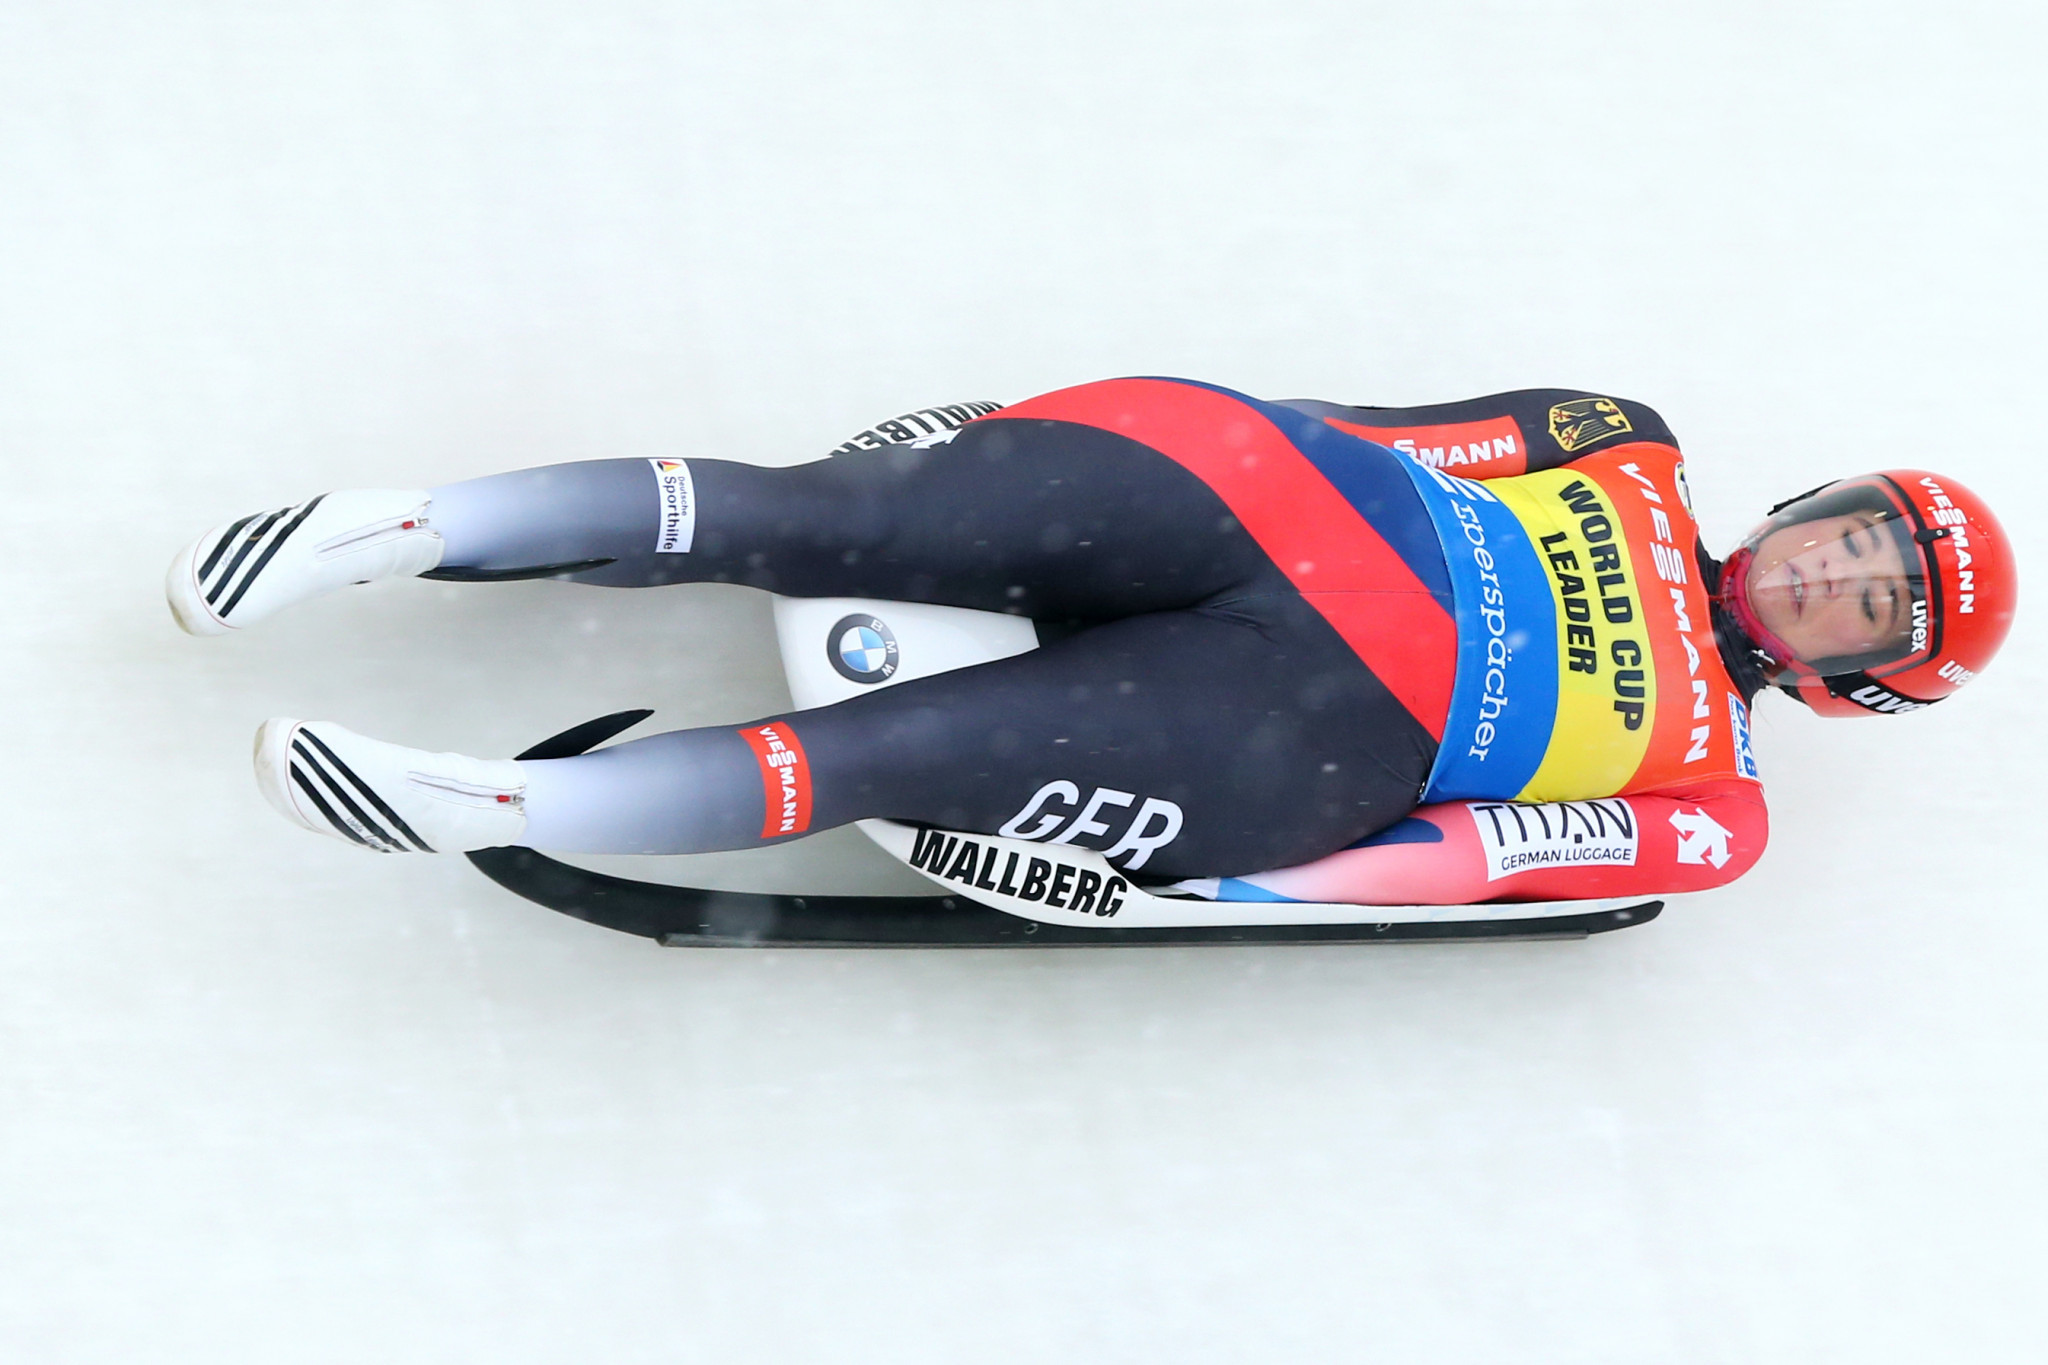 Geisenberger secures fifth Luge World Cup win of season in Königssee